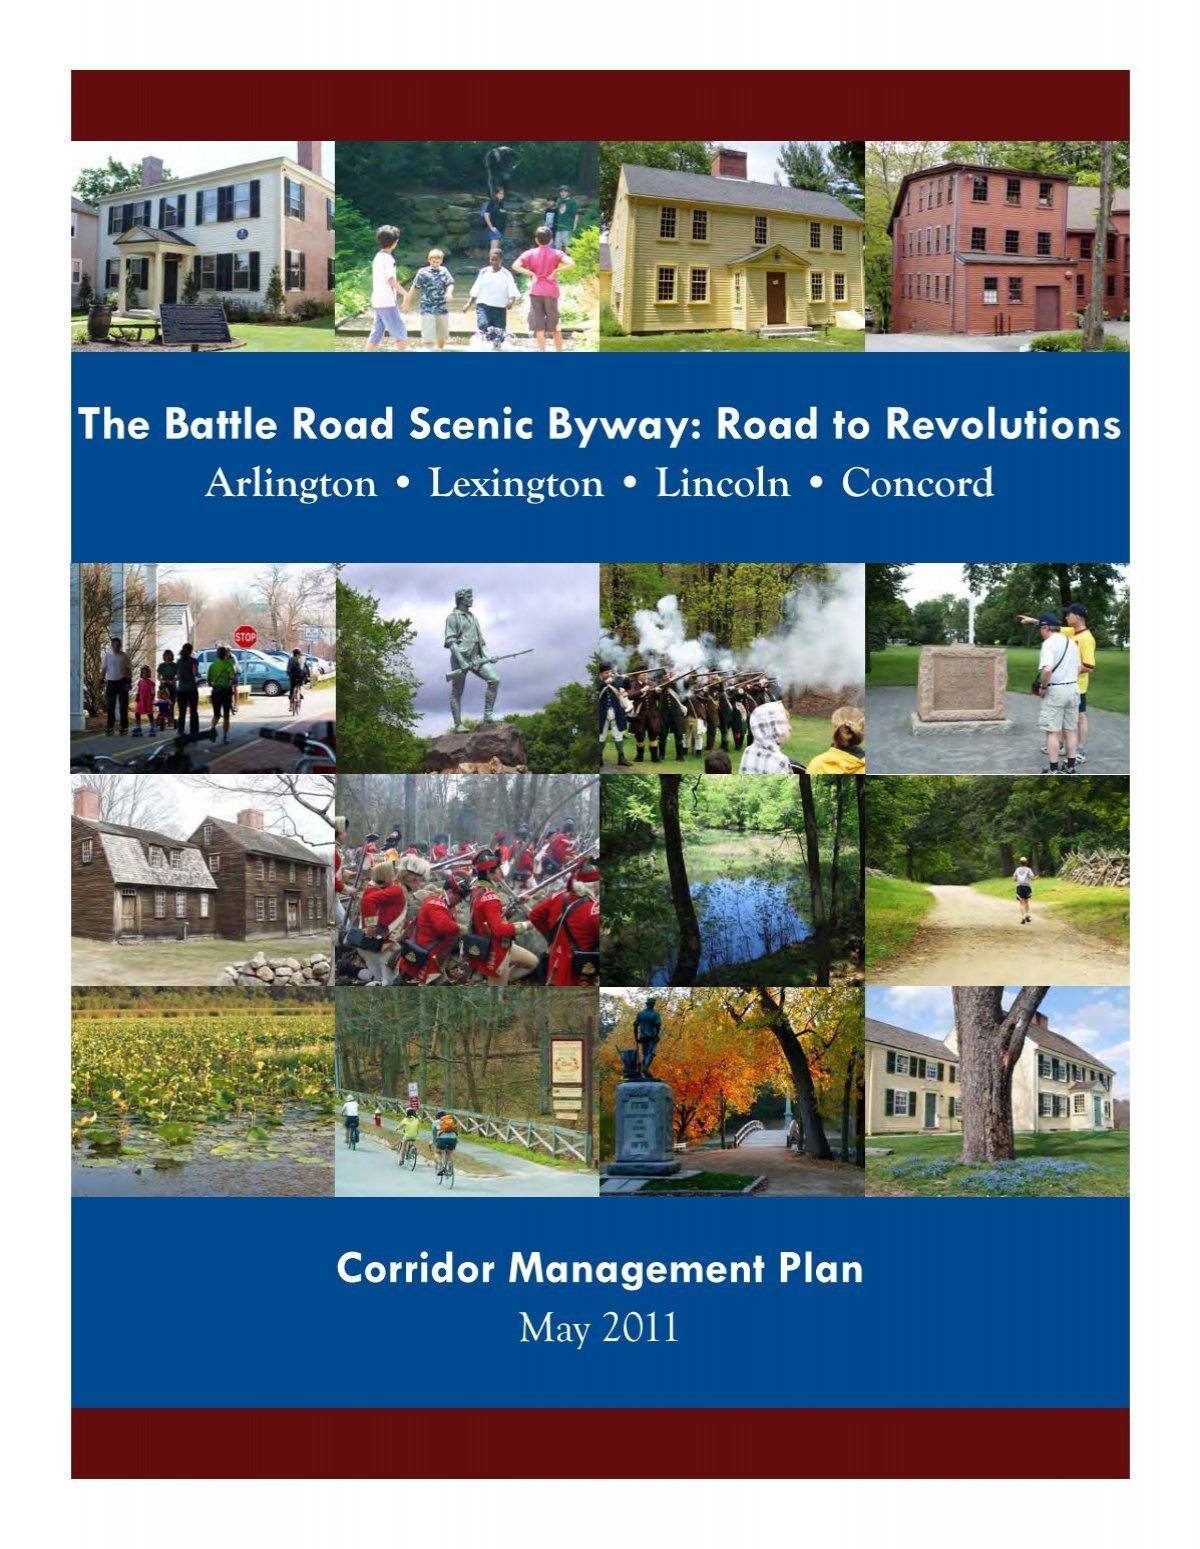 The Battle Road Scenic Byway - Metropolitan Area Planning Council